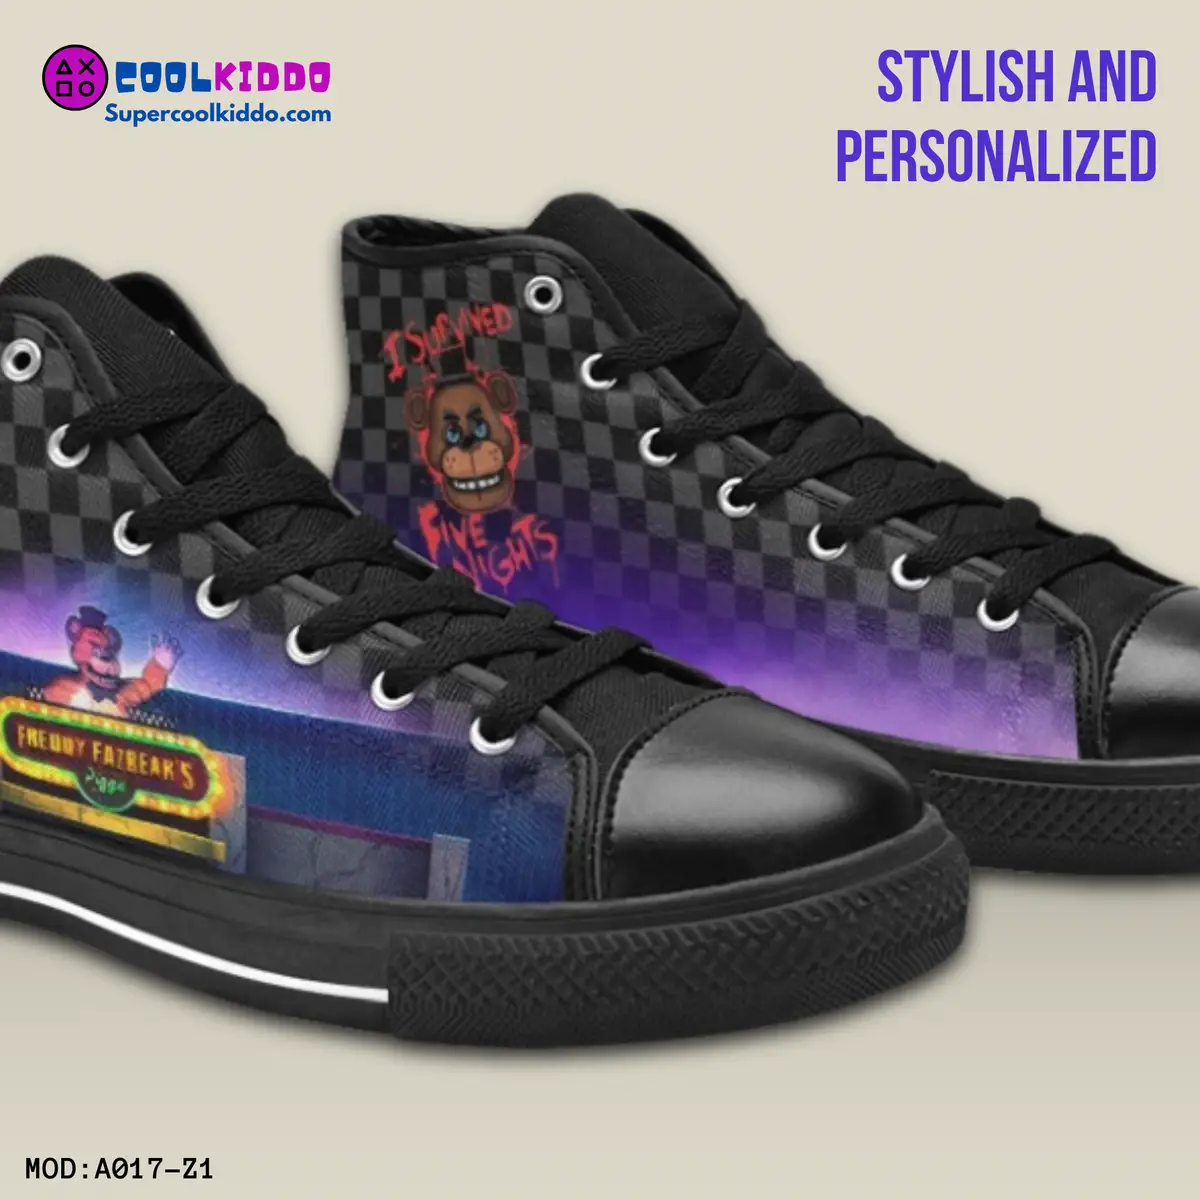 Five Nights at Freddy’s Movie Inspired High Top Shoes for Kids/Youth – Sneakers, Horror FNAF Movie Characters Cool Kiddo 24